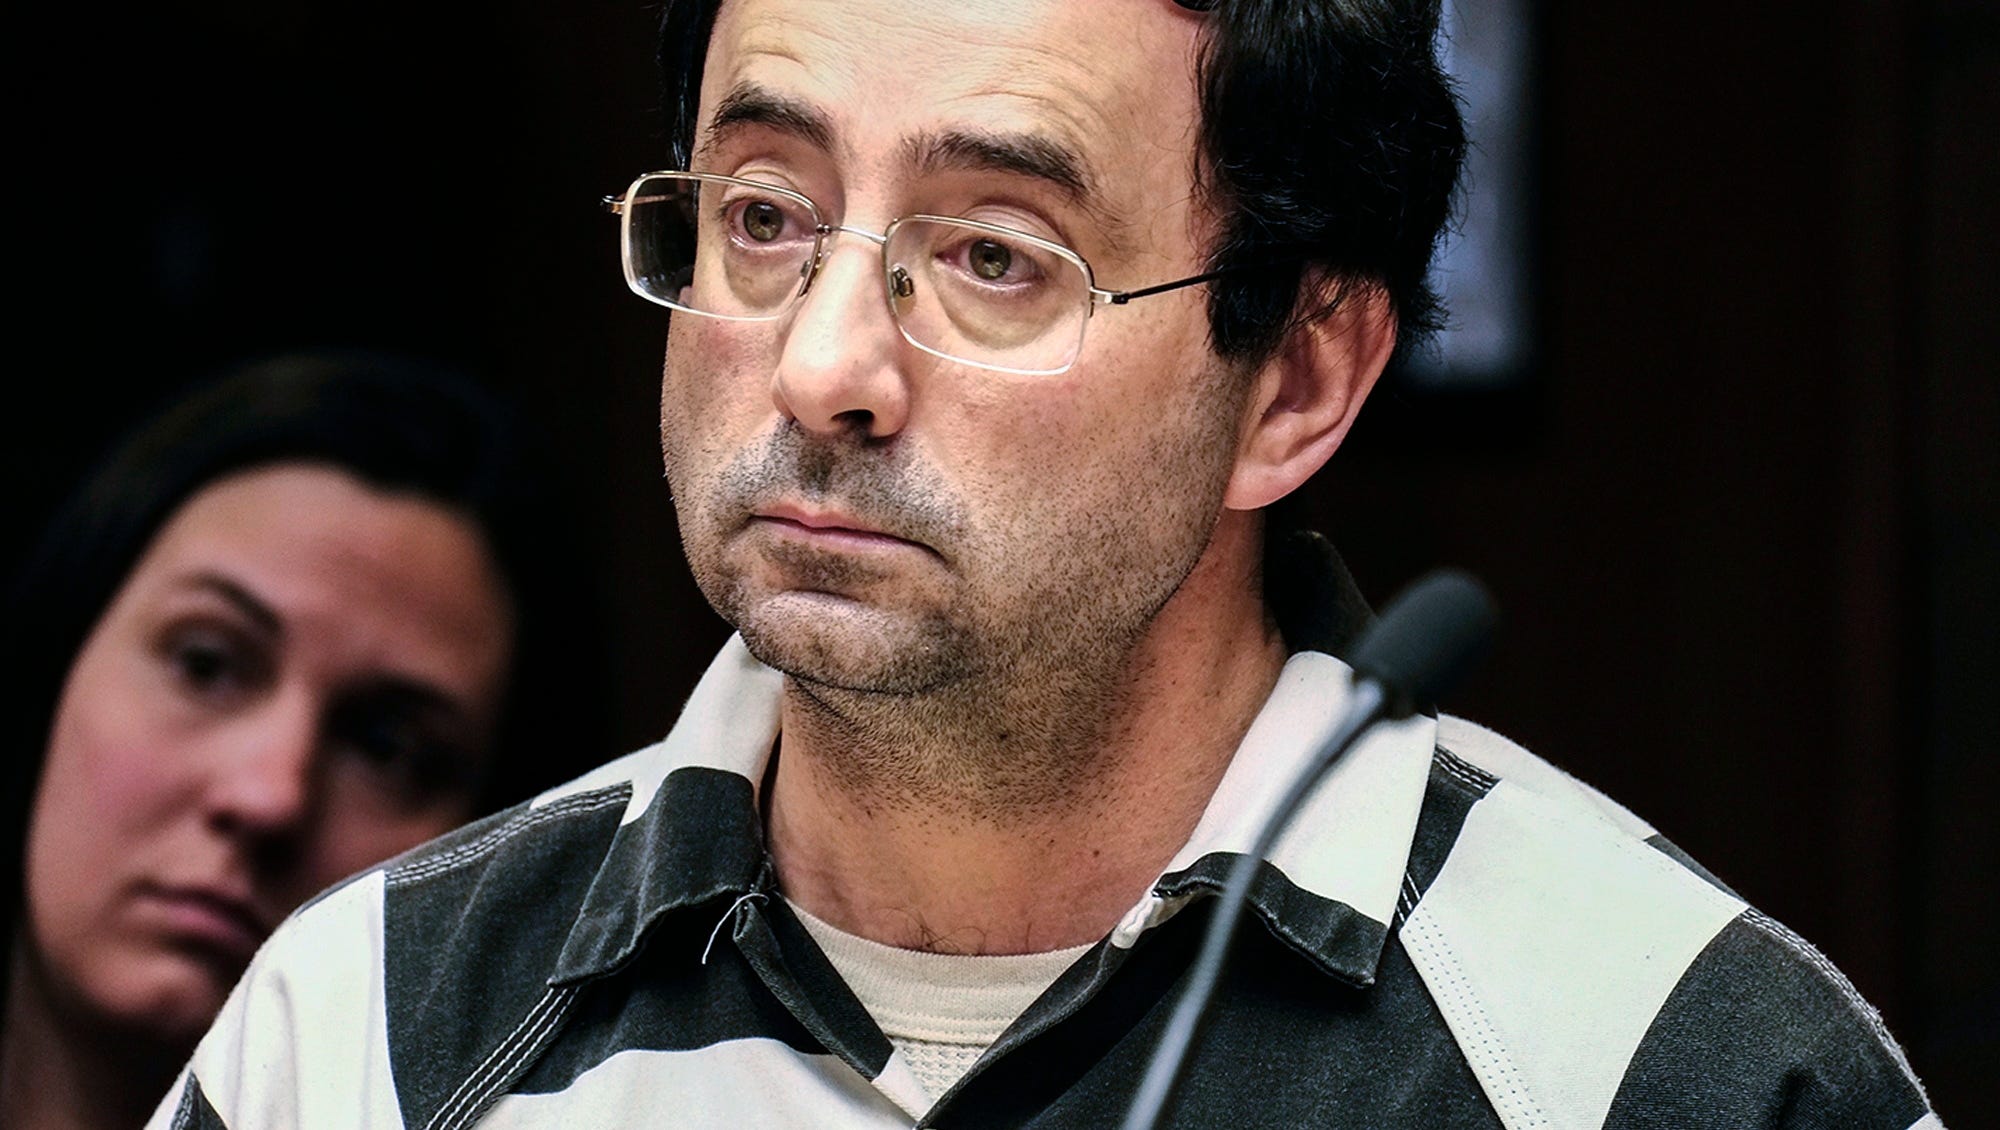 2016: Denhollander's revelations lead MSU to fire Nassar, who is later charged with criminal sexual conduct. "A monster was stopped after decades of being allowed to prey on women and little girls," Denhollander said in an interview with The Detroit News, "and he wasn't stopped by a single person who could have, and should have stopped him at least 20 years ago."